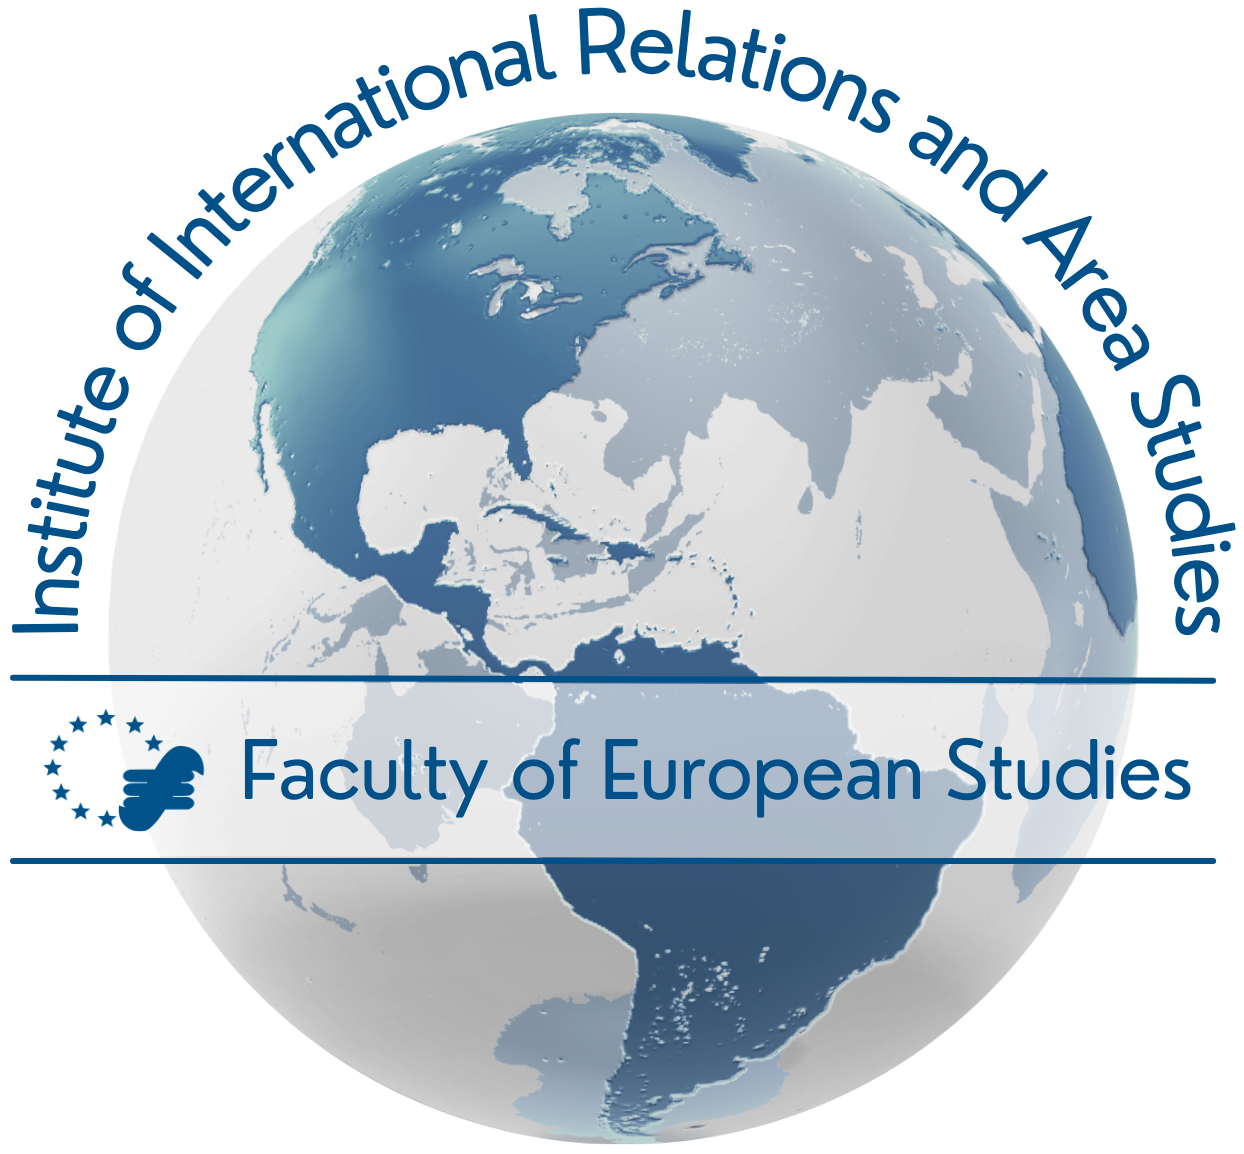 The Institute of International Relations and Area Studies